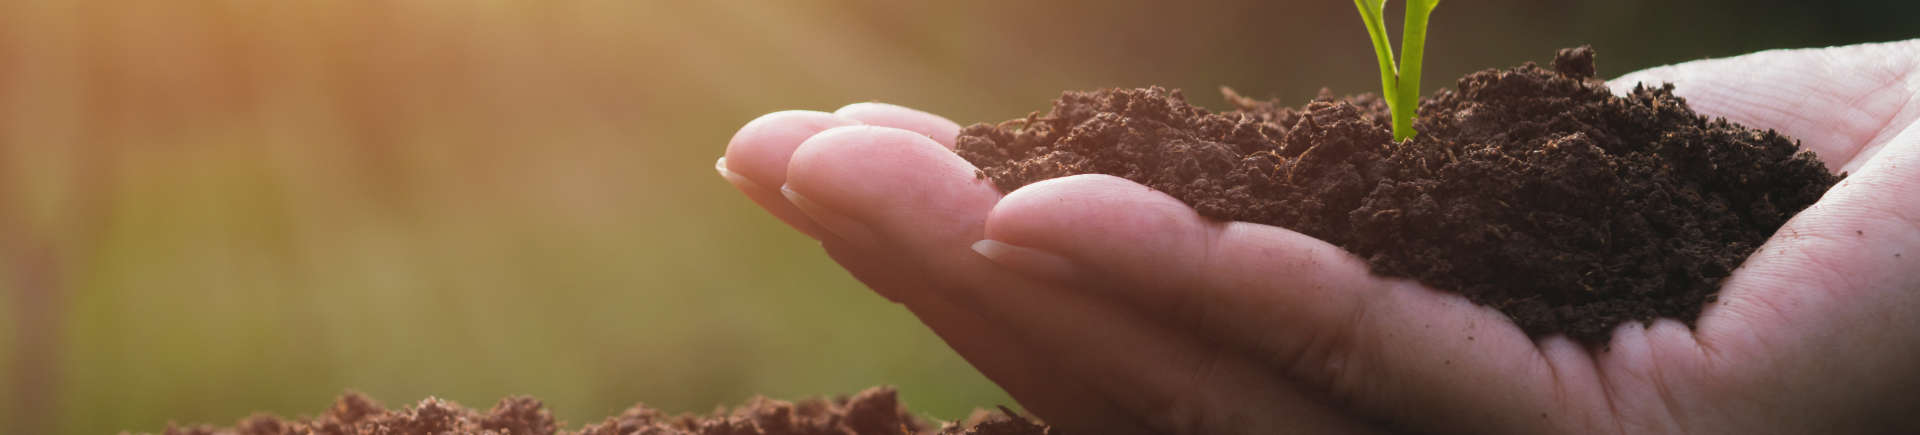 open hand carrying soil with a green plant